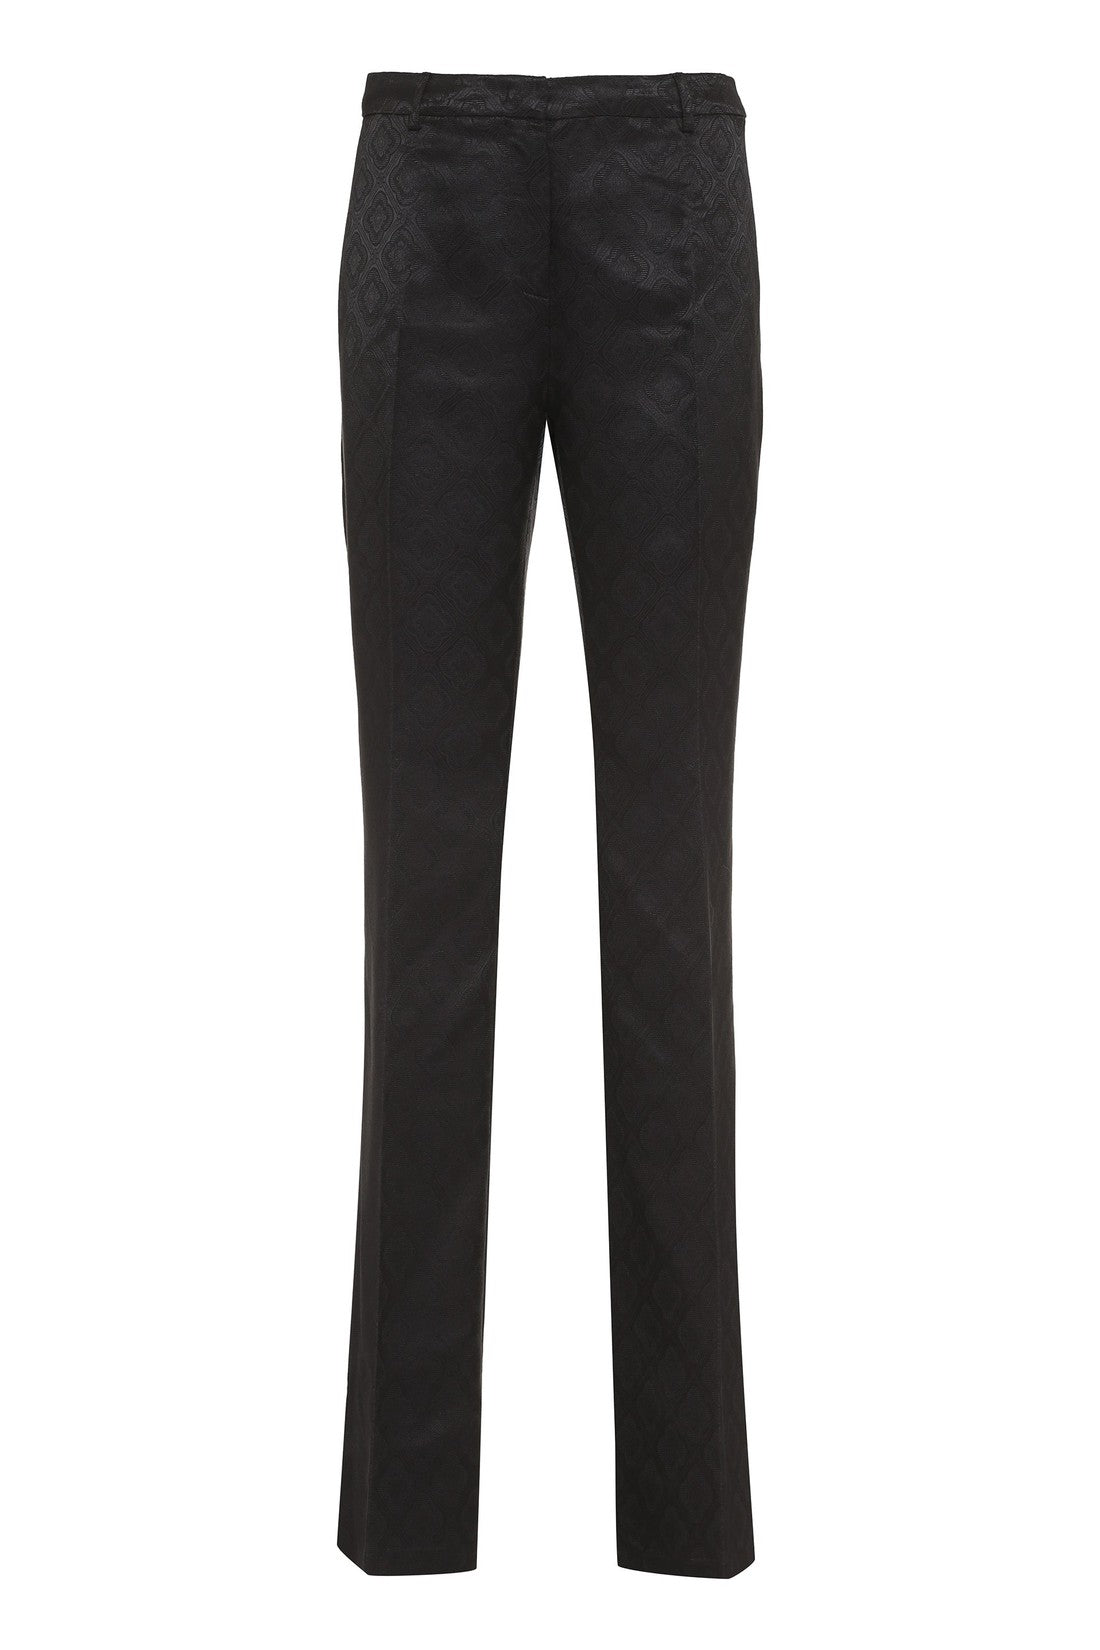 Etro-OUTLET-SALE-Flared trousers-ARCHIVIST